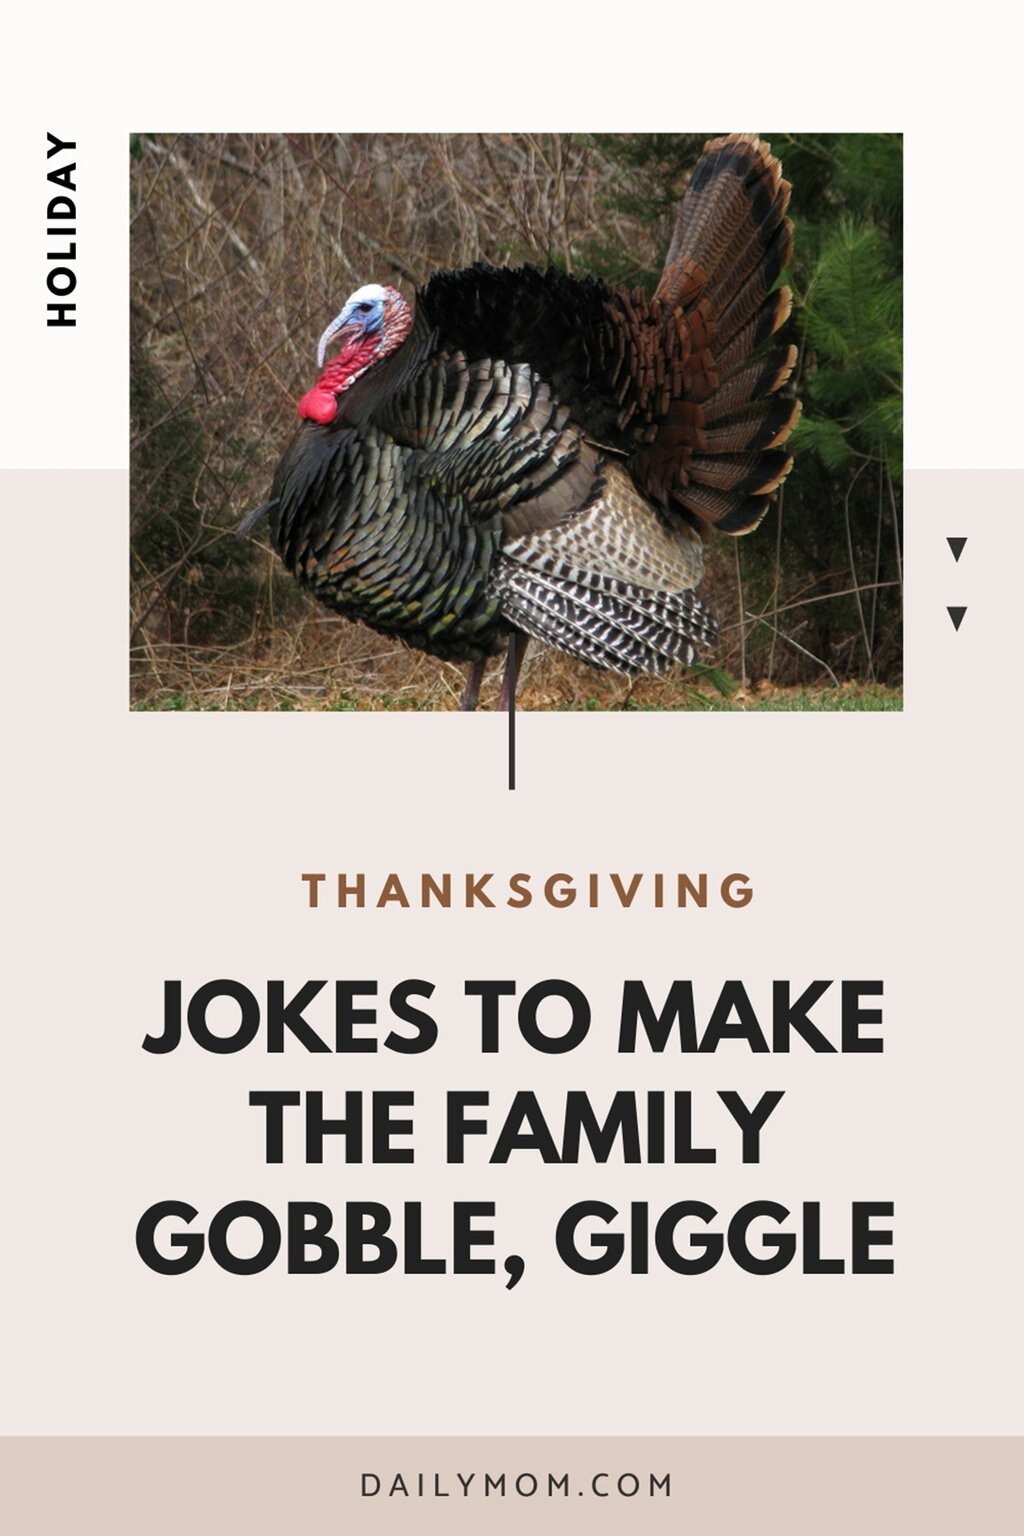 42 Hilarious Jokes For Thanksgiving To Make The Family Gobble And Giggle